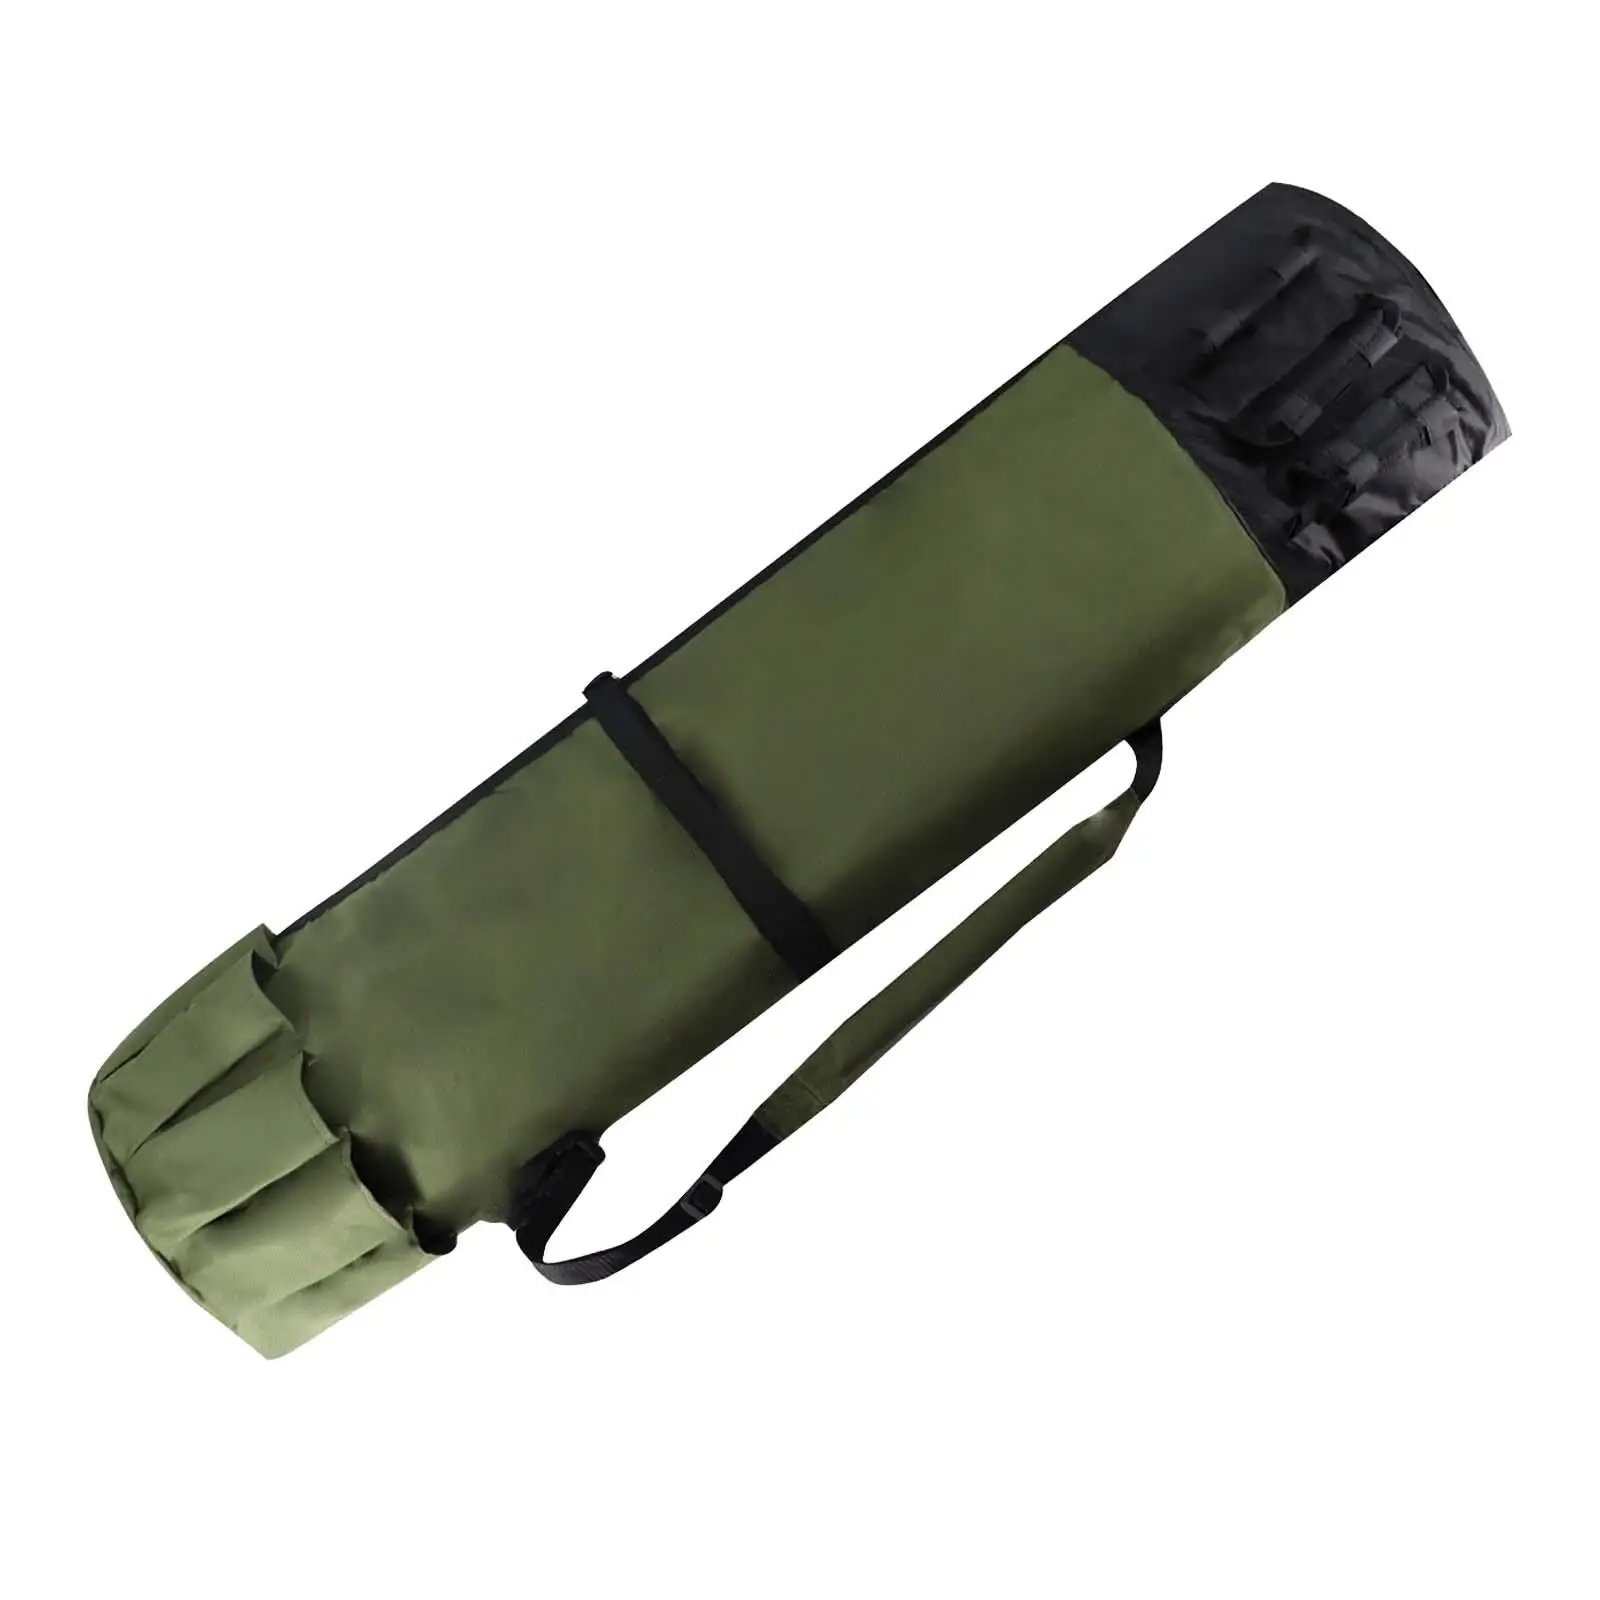 Fishing Rod Bag Fishing Tackle Carry Case Durable Outdoor Travel Storage Bag